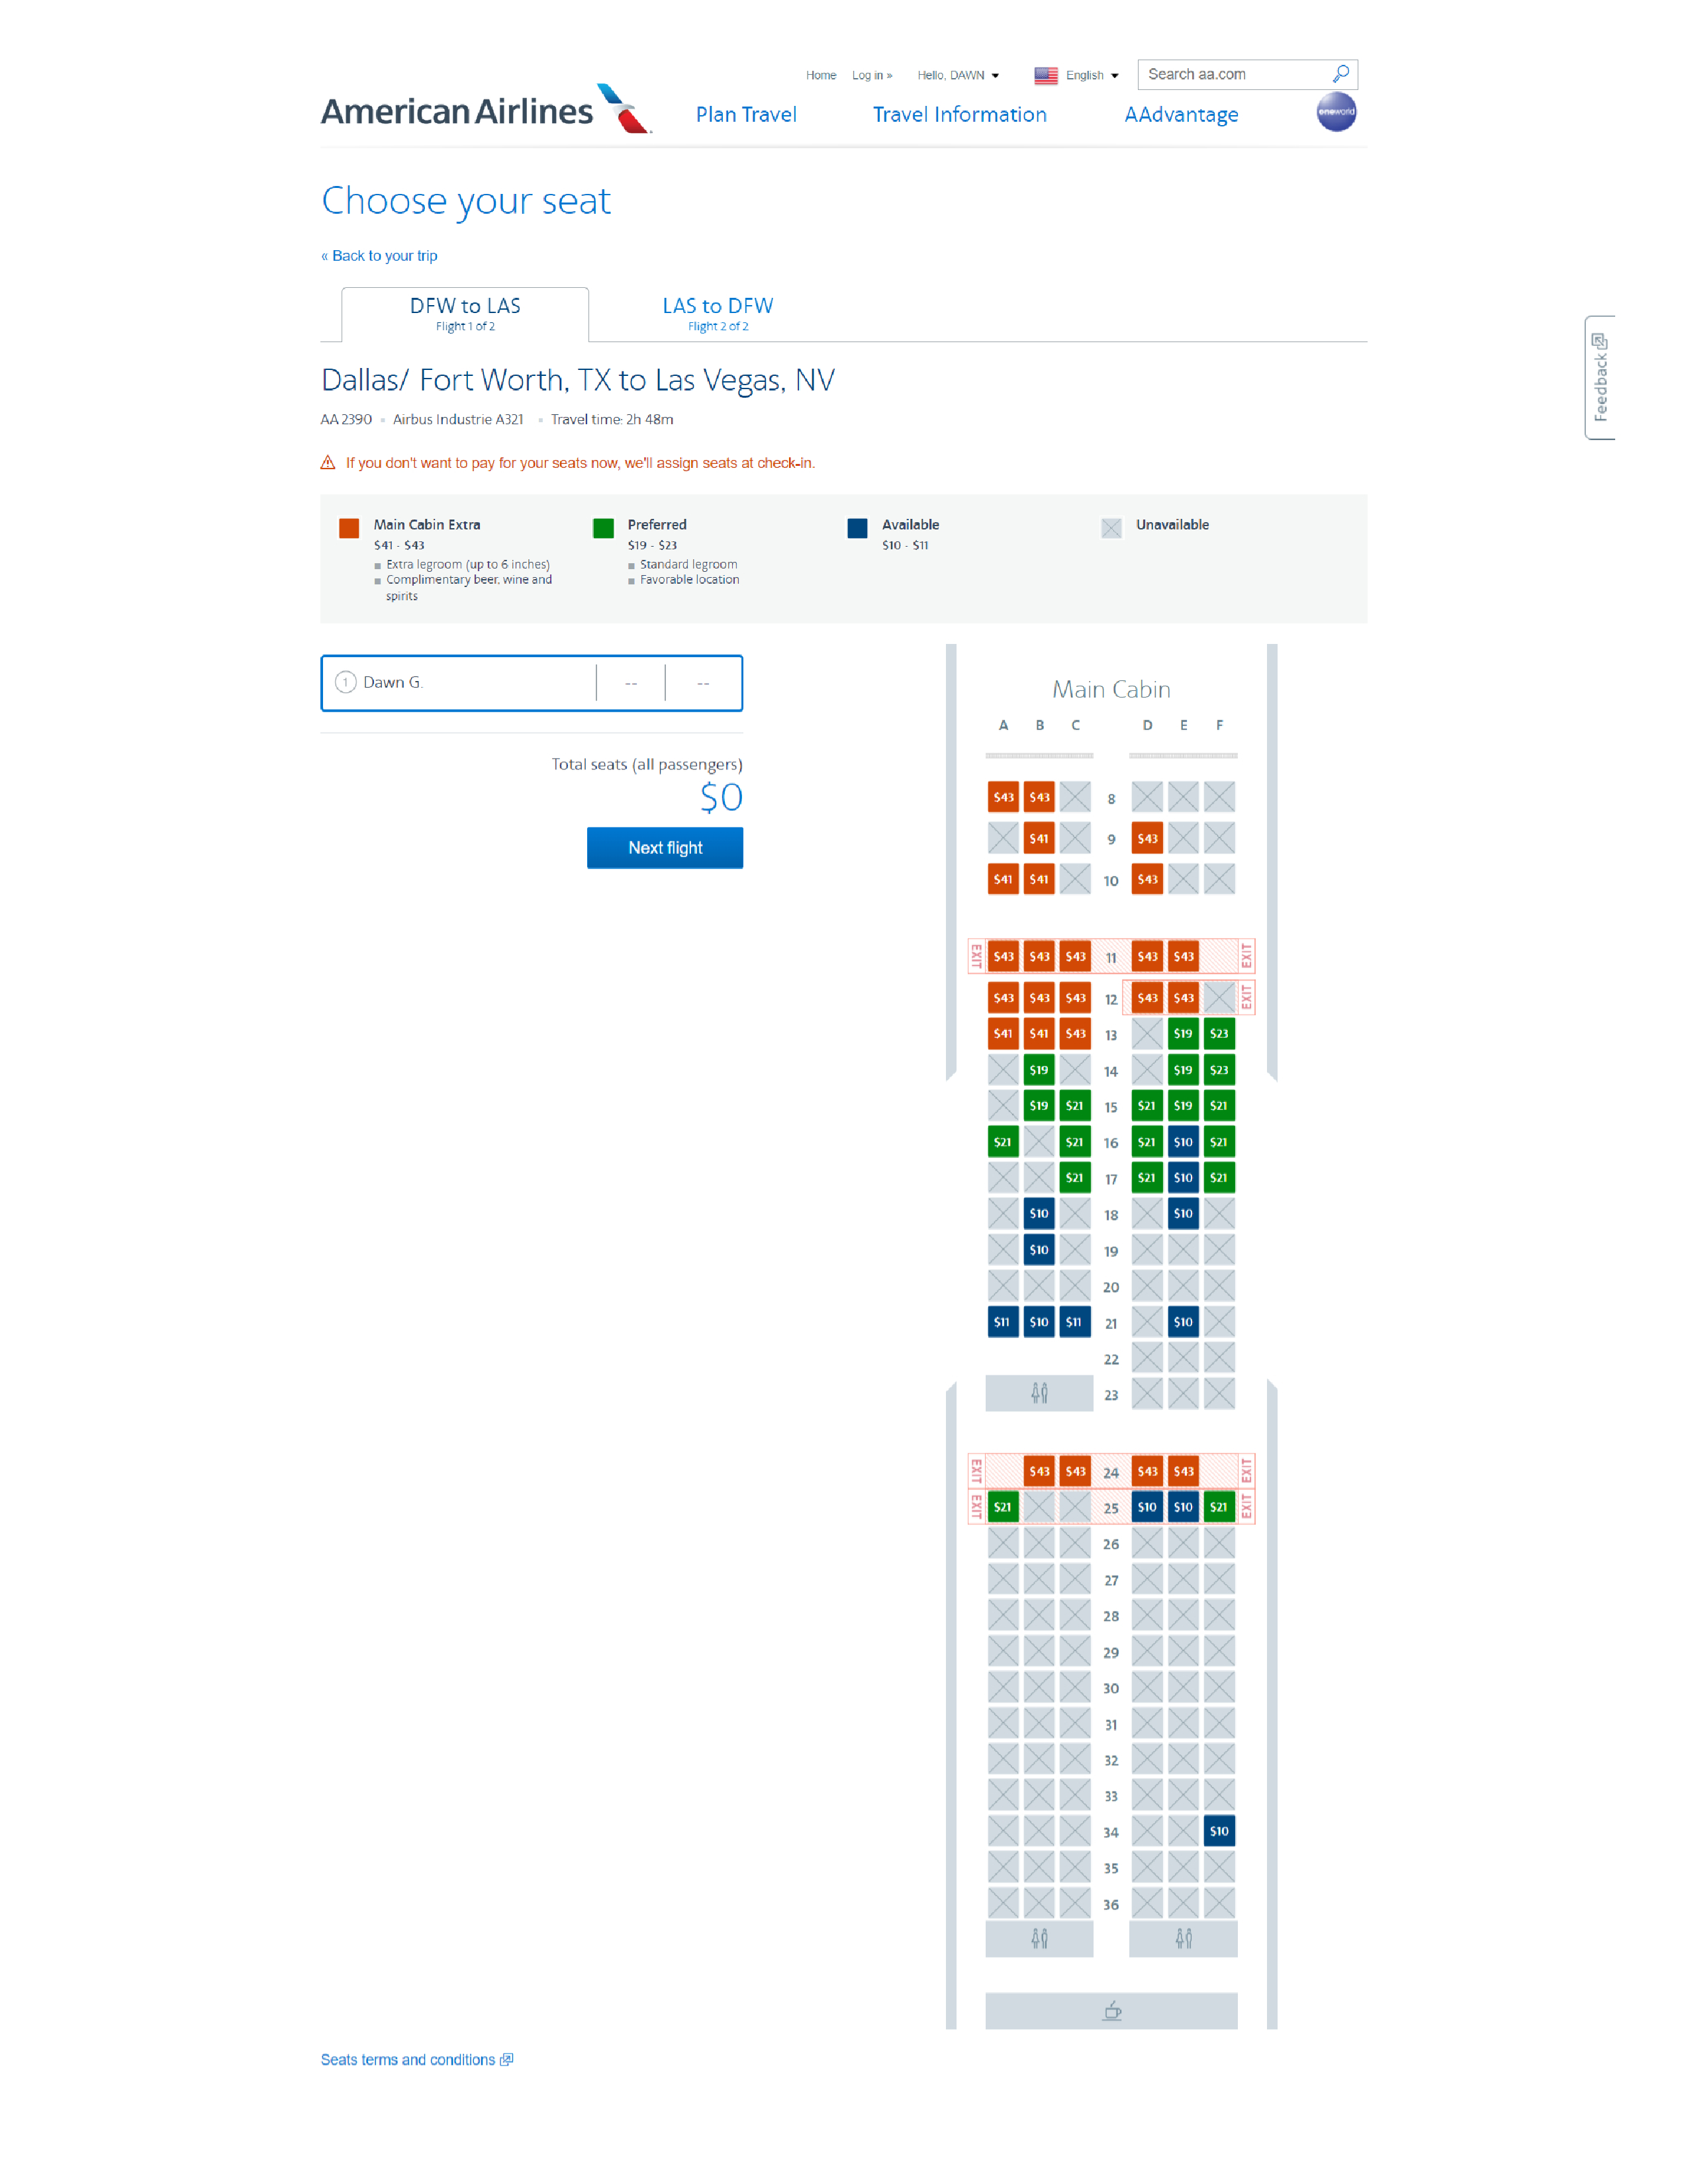 united seat assignment cost